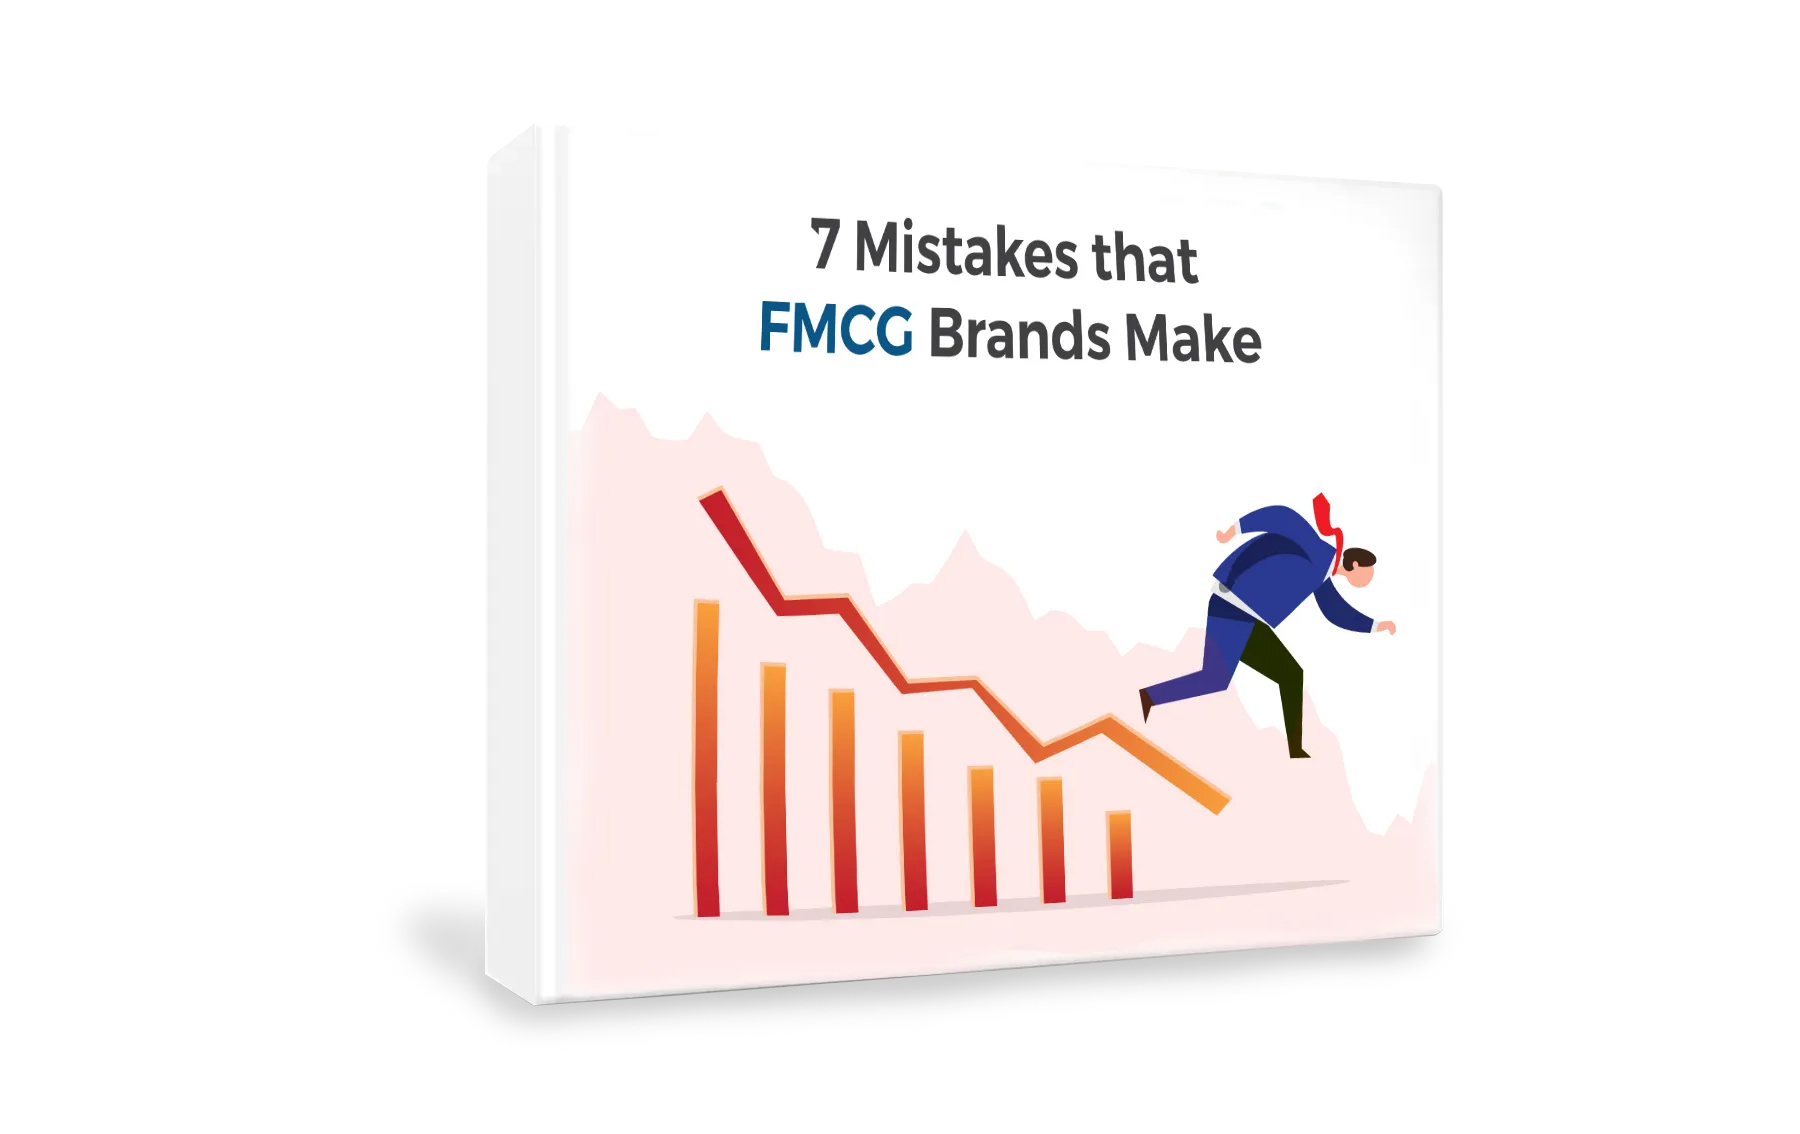 7 Mistakes that FMCG Brands Make